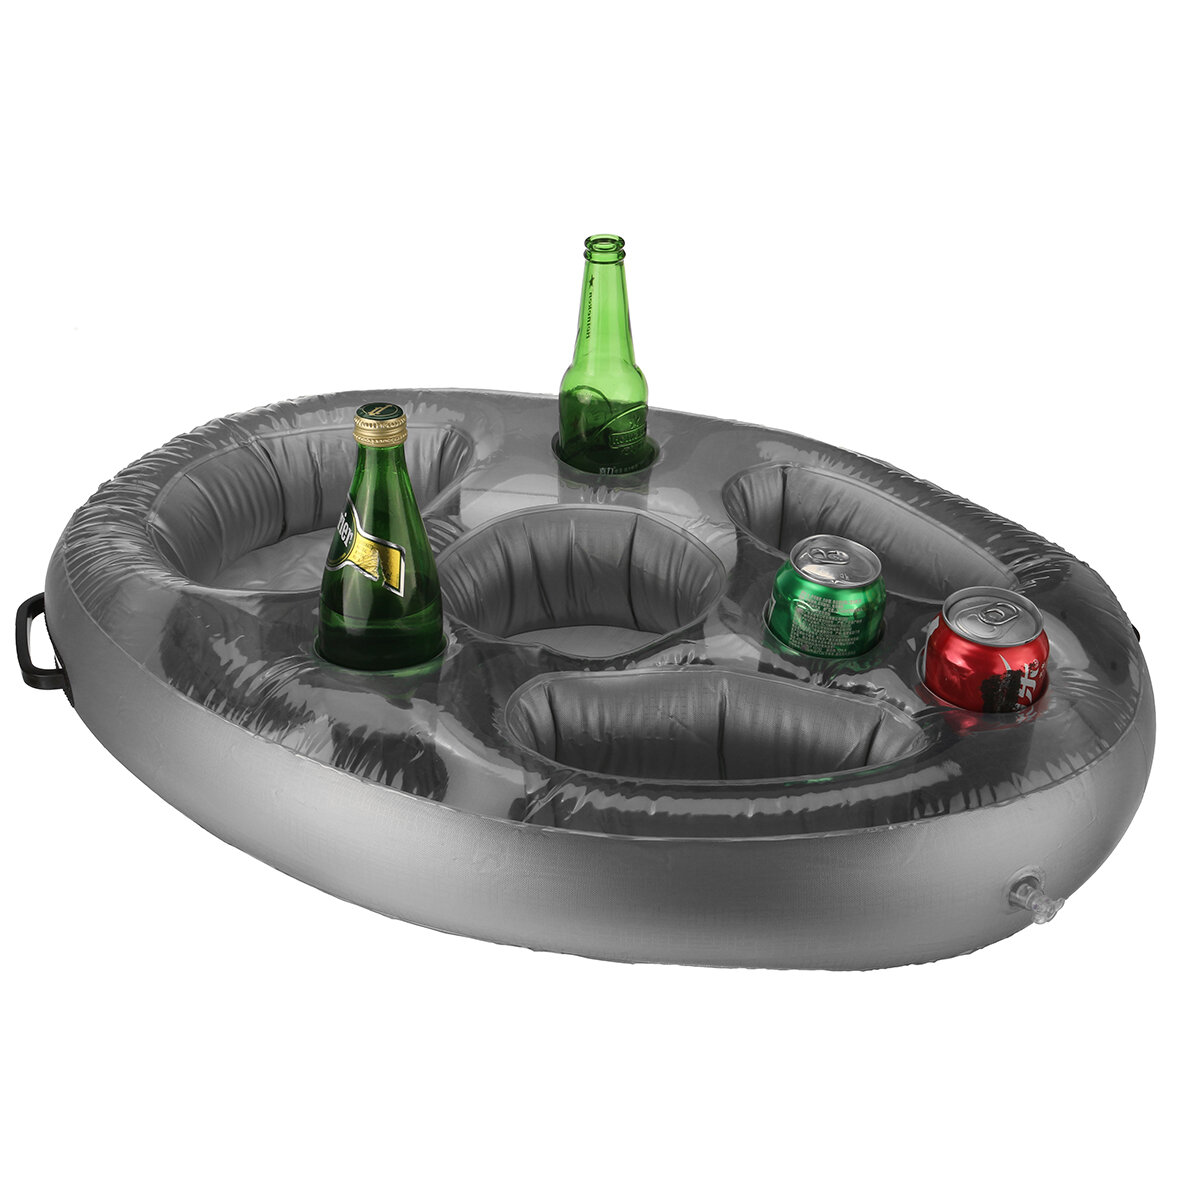 Floating Drink Holder Swimming Pool Table Tray 8 Holes Reusable Inflatable Coasters Outdoor Beach